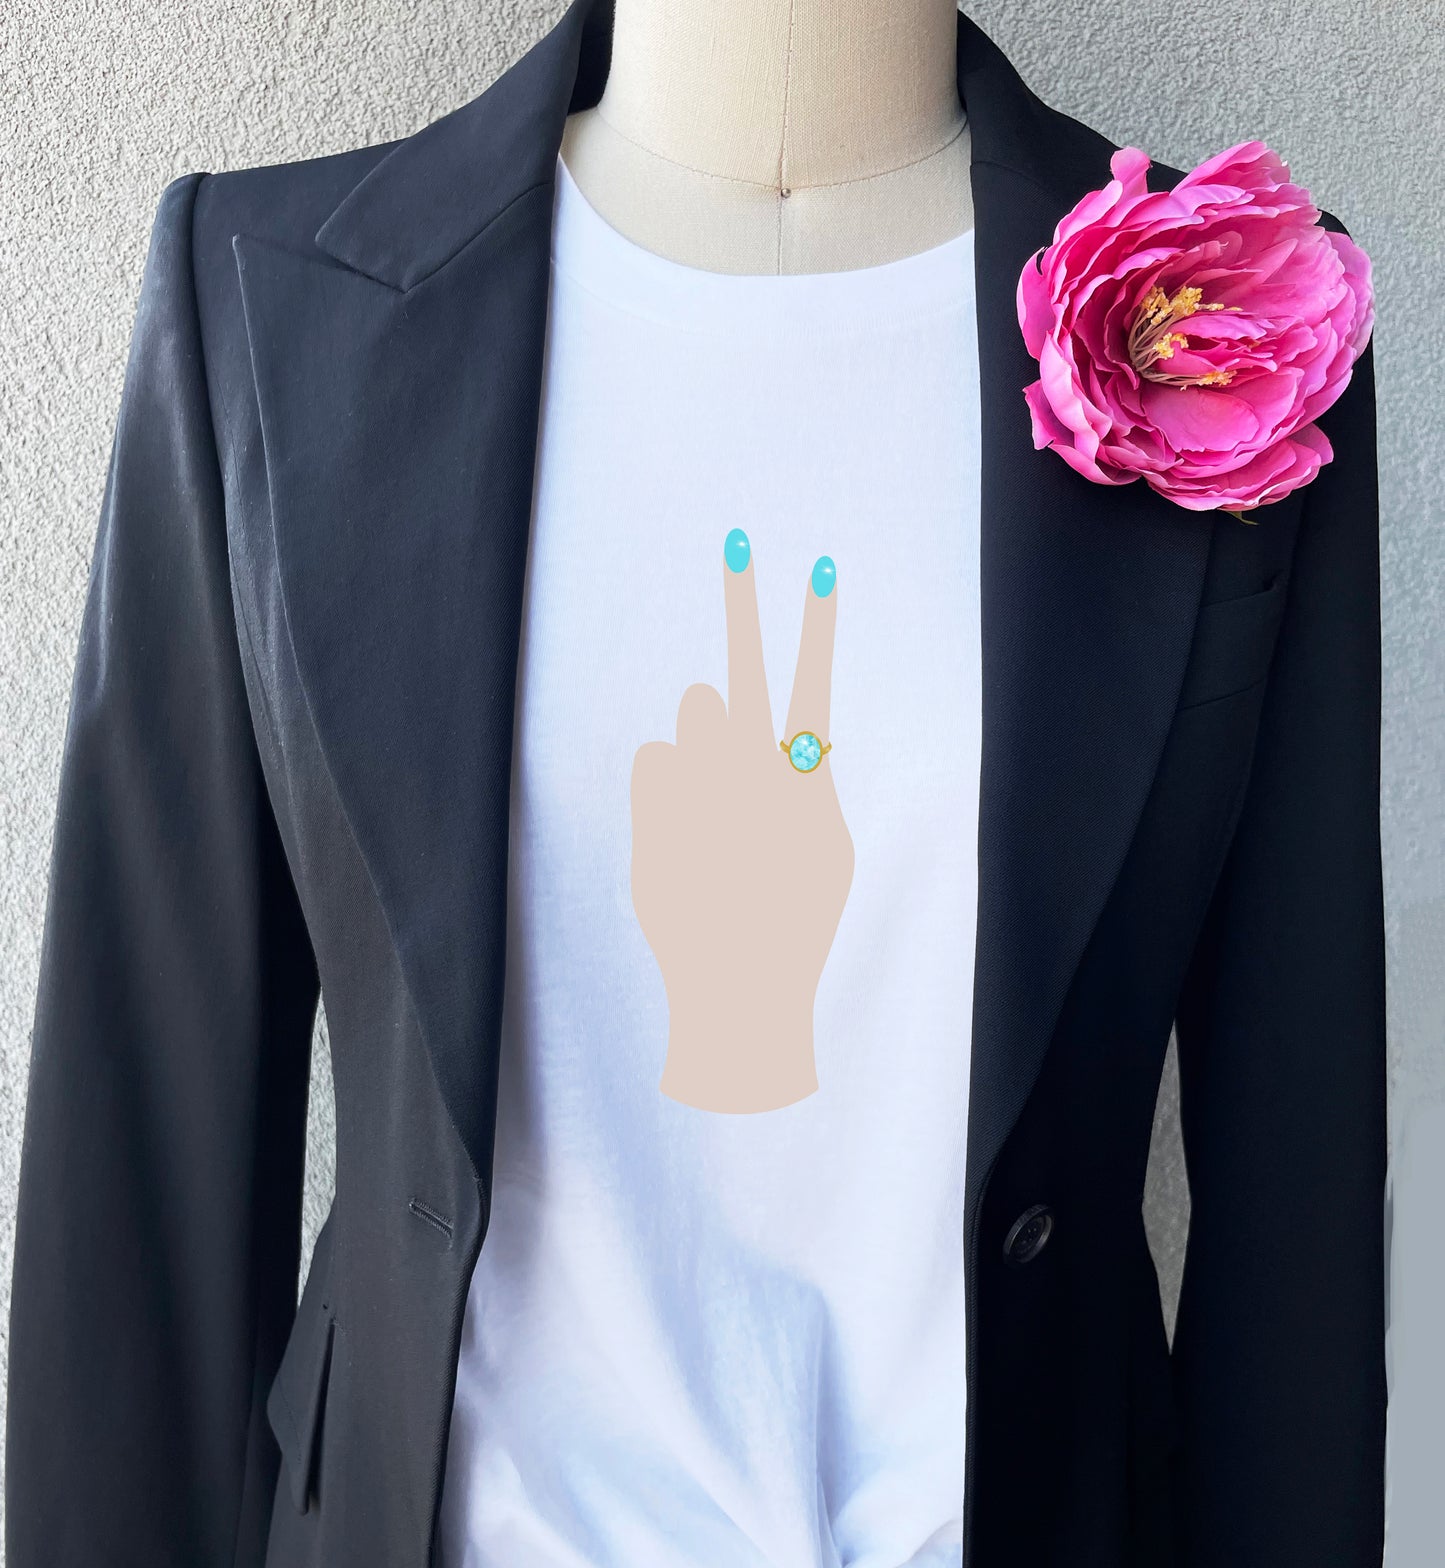 Peace Sign print t-shirt for women. Classic crewneck short sleeve tee features a hand wearing a glamorous aqua ring and a fabulous light blue manicure flashing the peace sign.